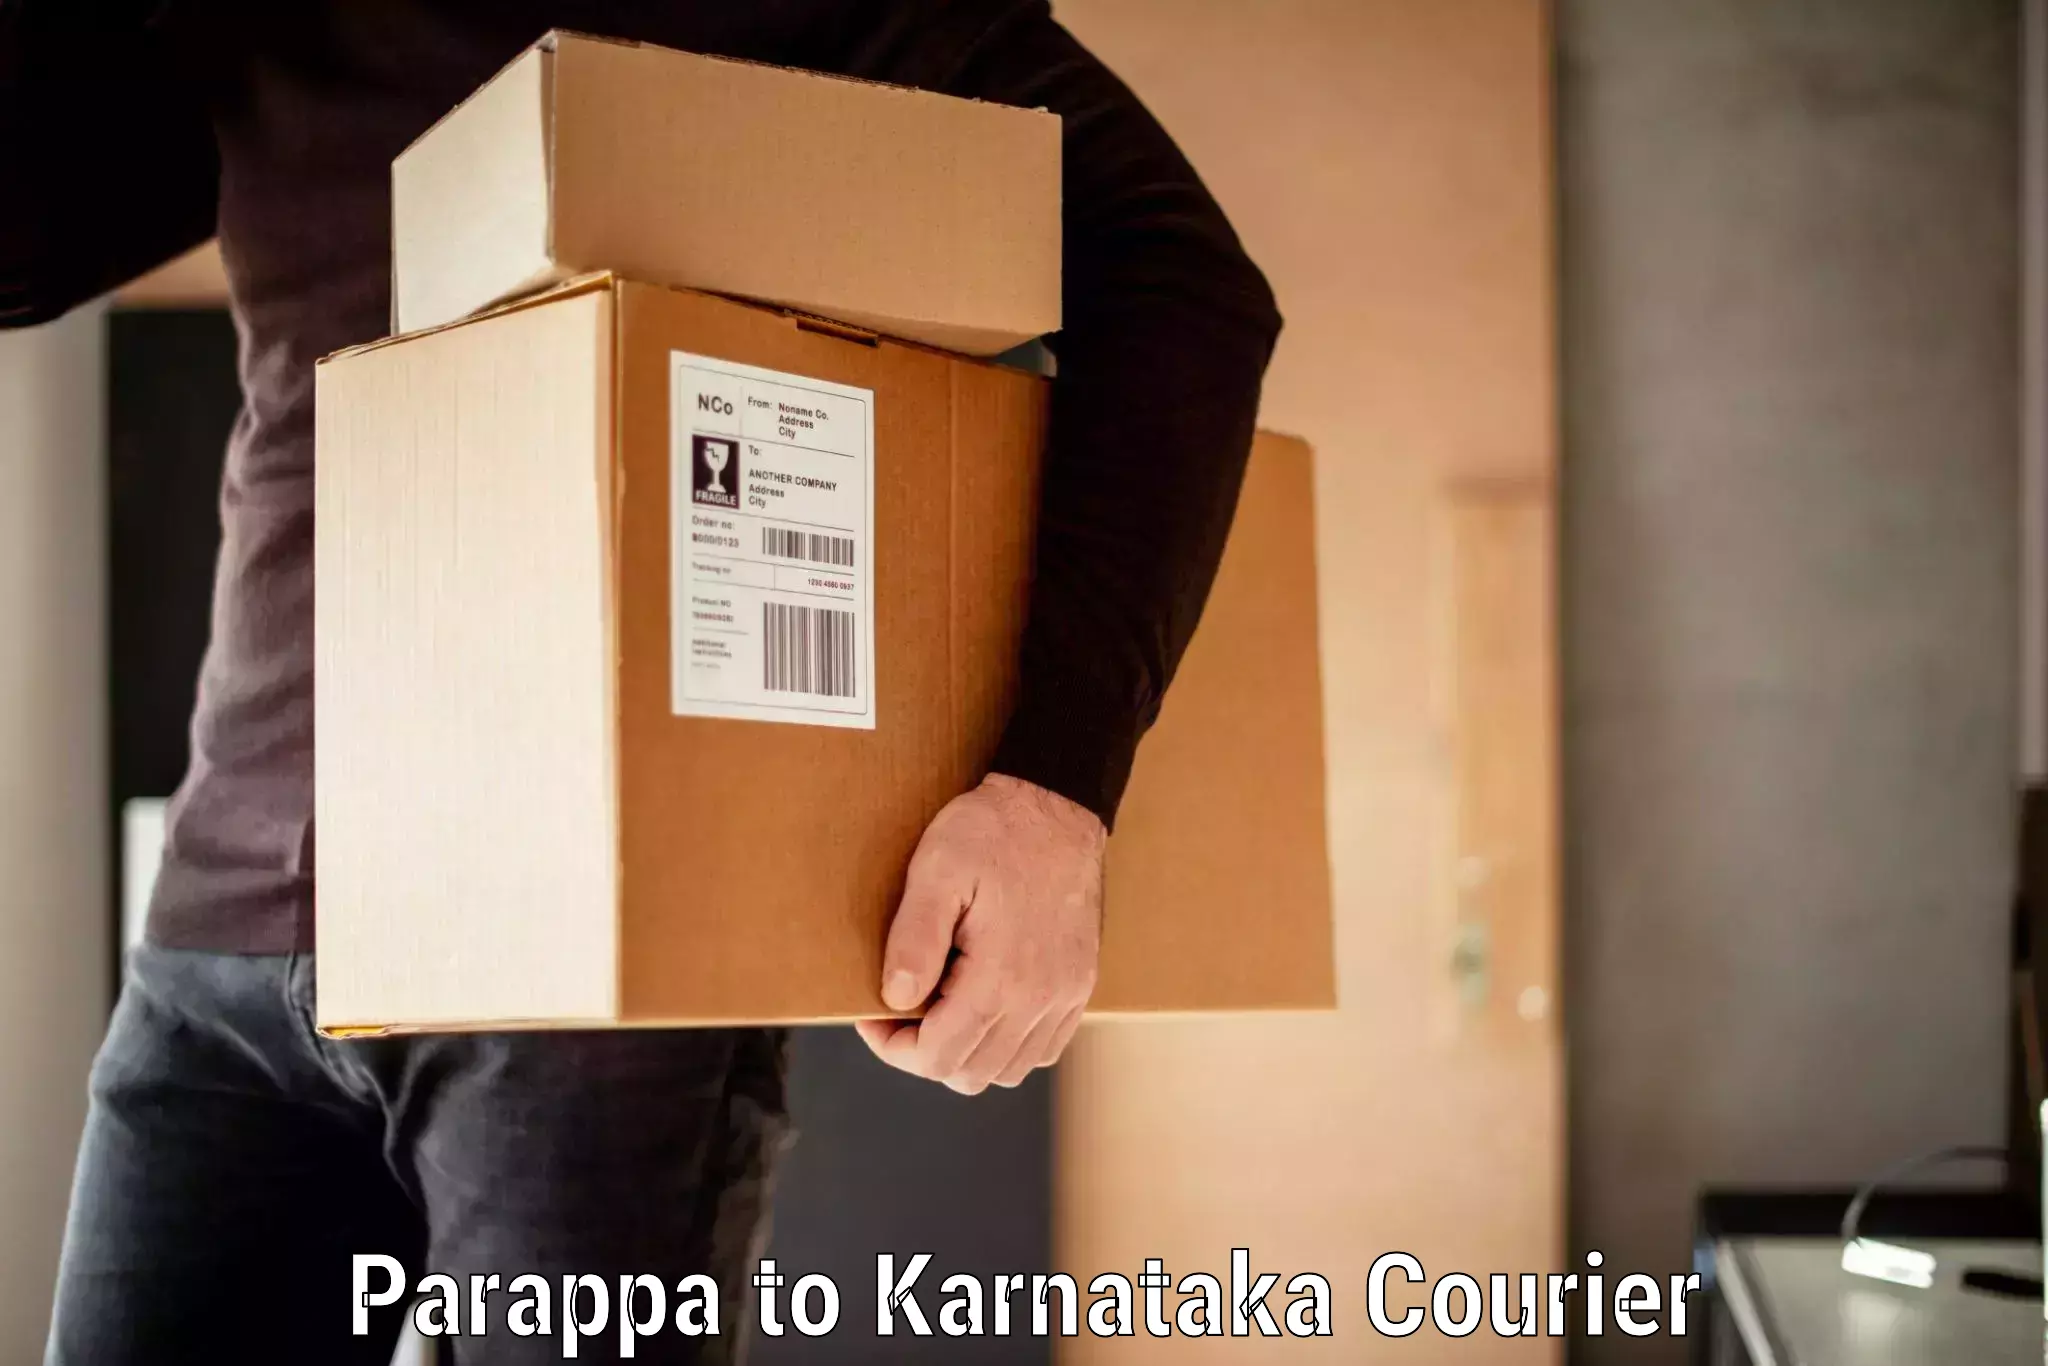 Same day luggage service in Parappa to Surathkal